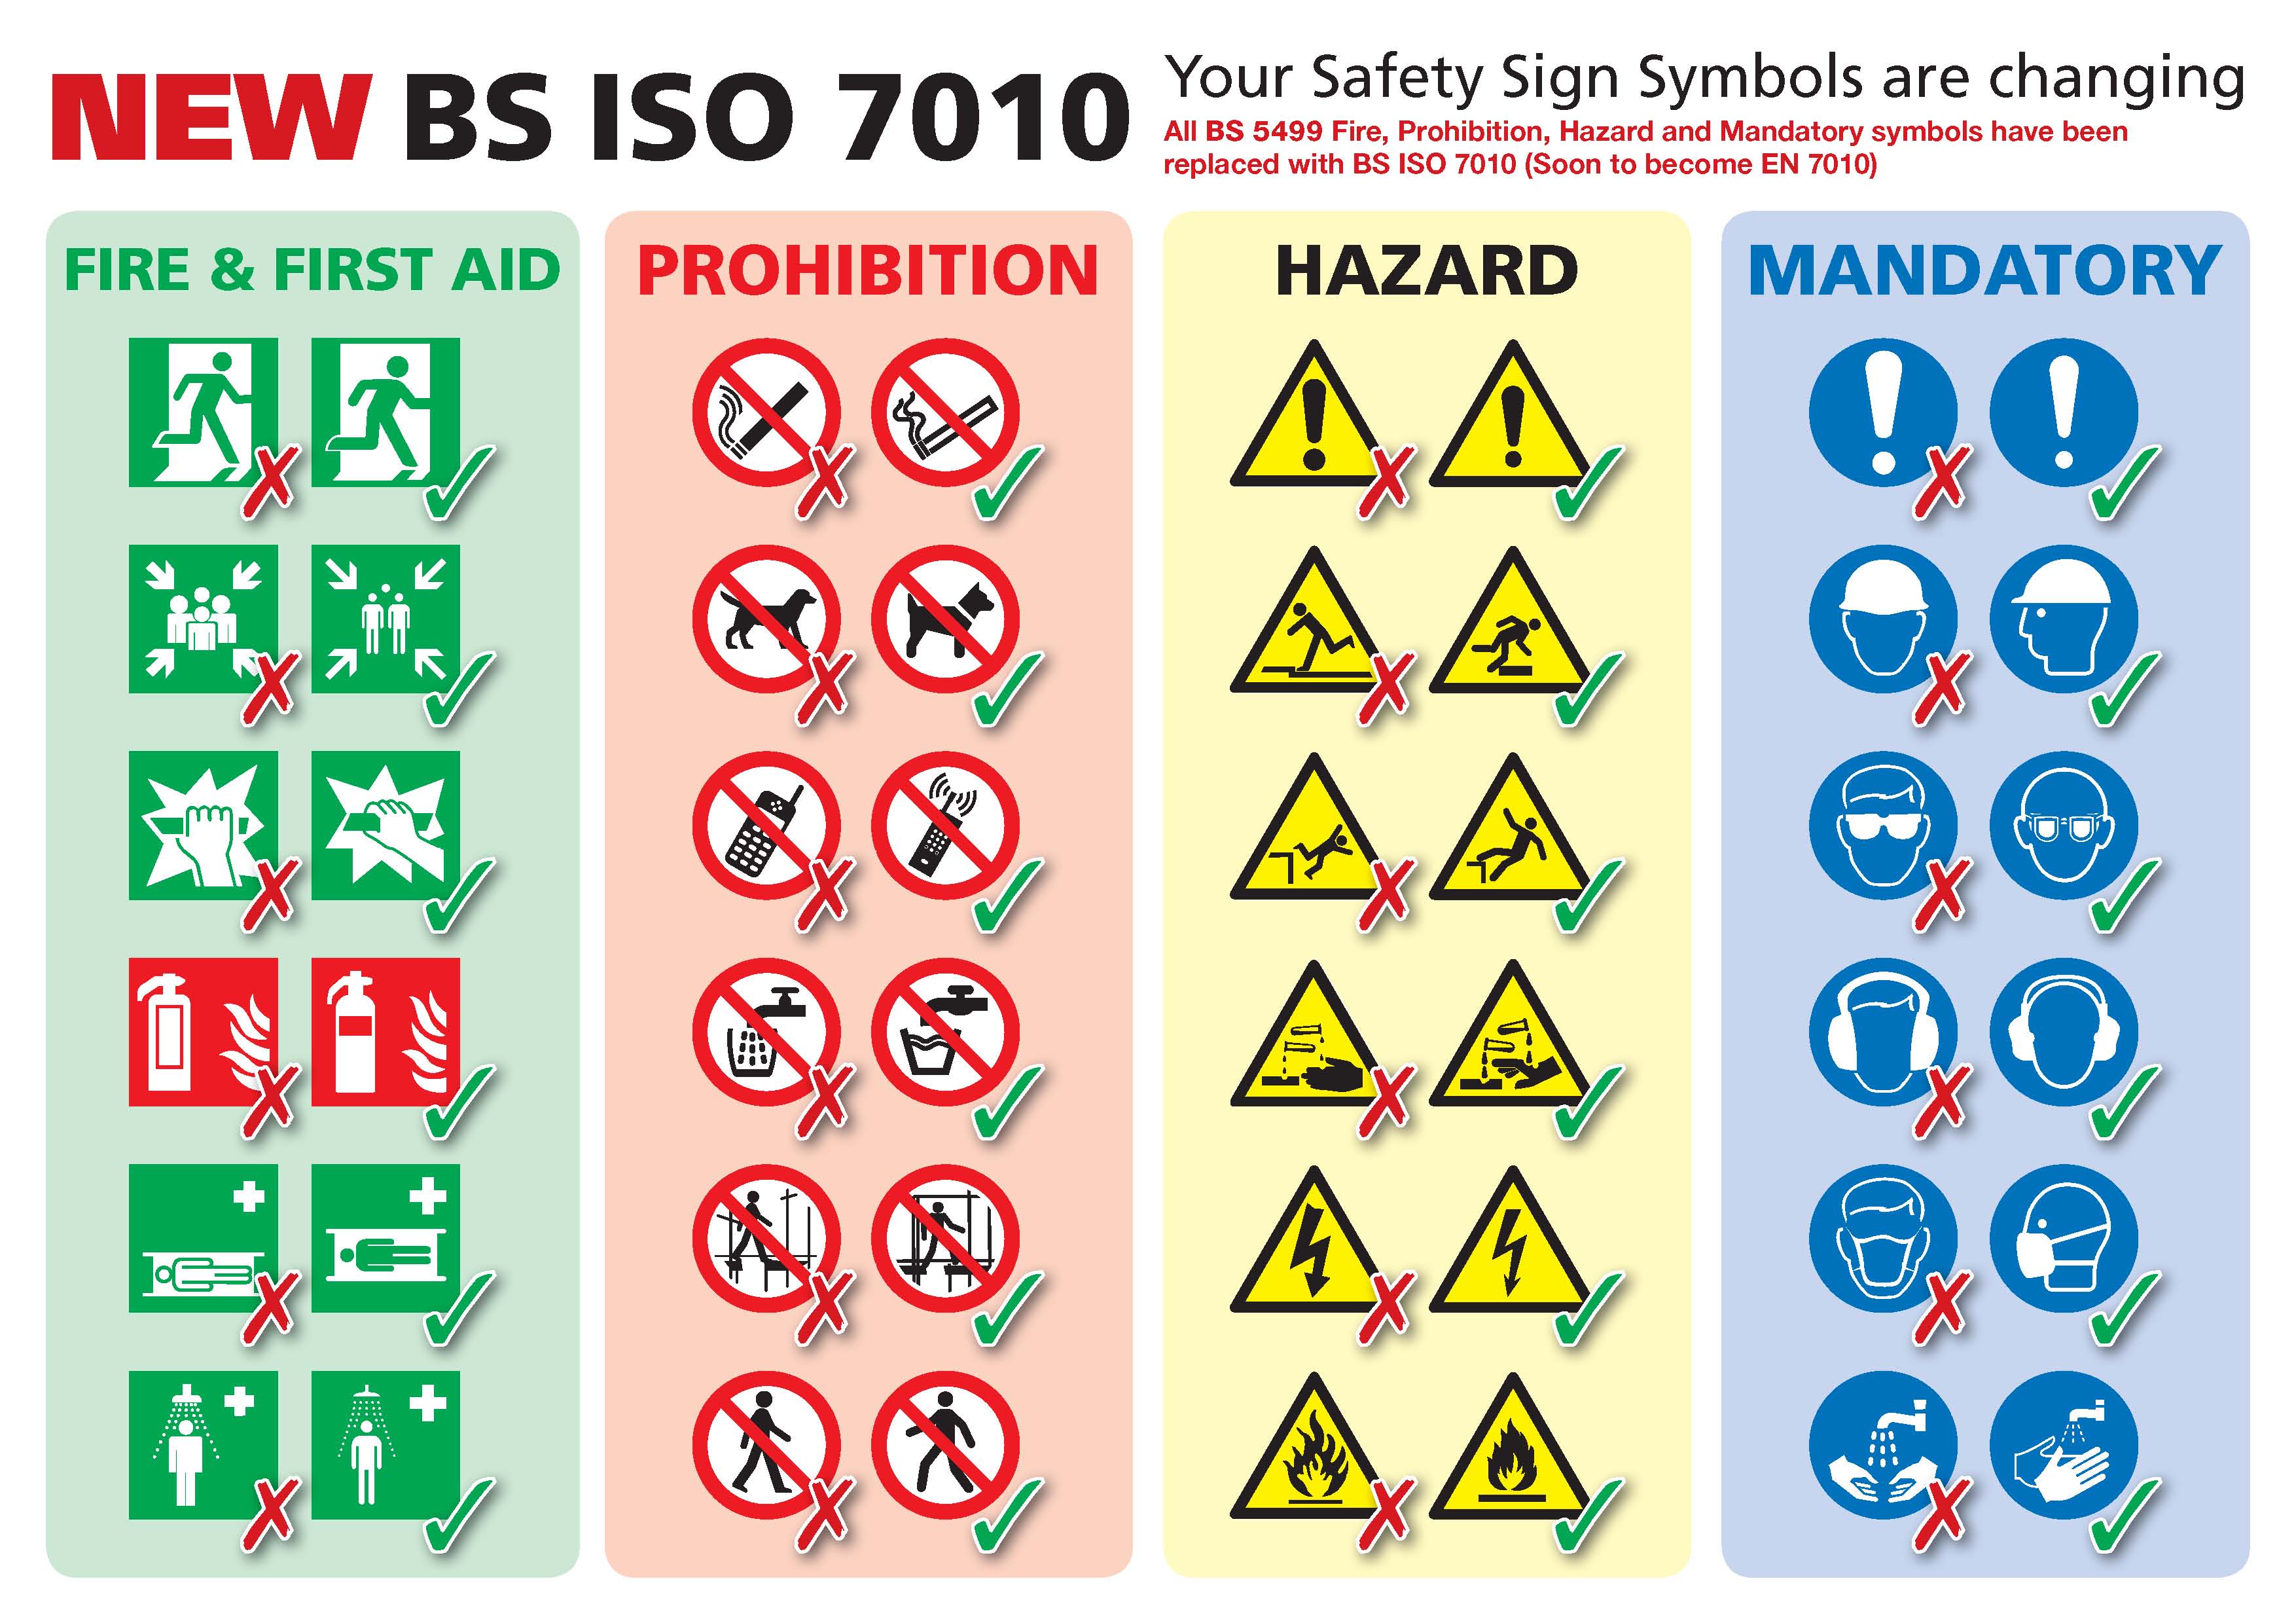 BS-ISO-7010-safety-signs-flyer-3